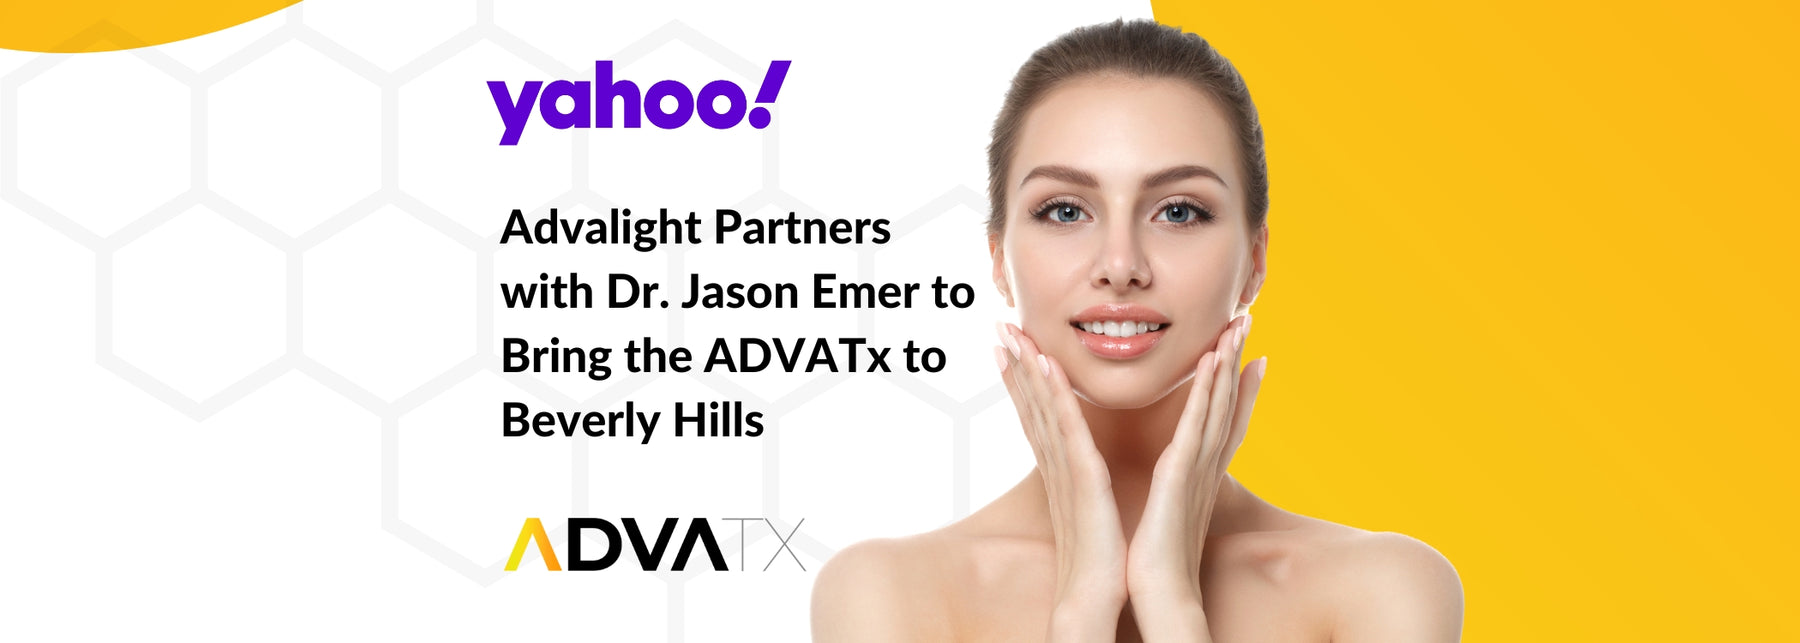 Advalight Partners with Dr. Jason Emer to Bring the ADVATx to Beverly Hills